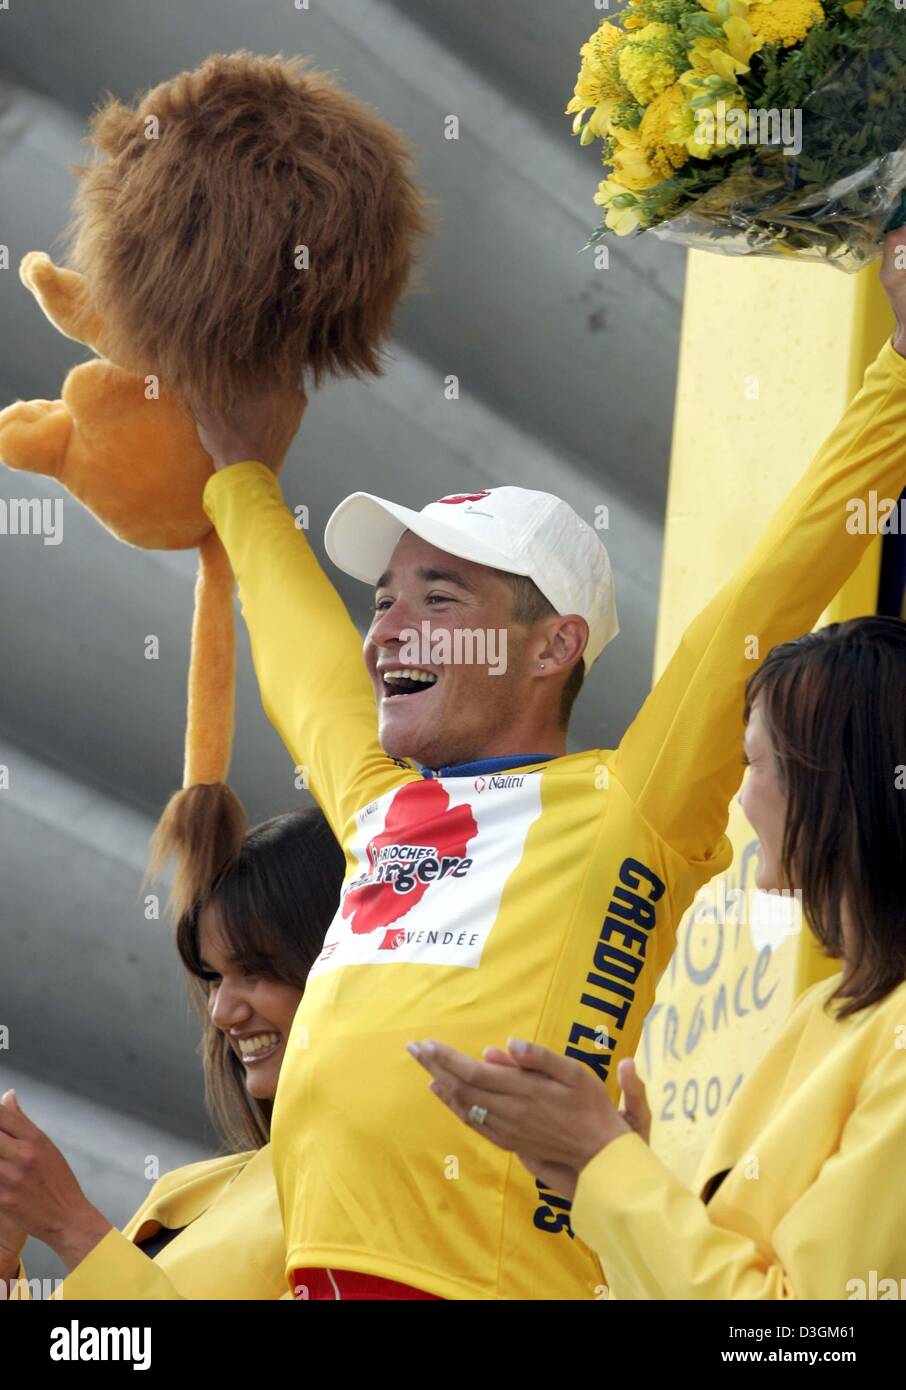 (dpa) - French cyclist Thomas Voeckler (C) of Team Brioches La Boulangere cheers and smiles as he wears the yellow jersey of the front runner after the fifth stage of the Tour de France cycling race in Chartres, France, 8 July 2004. The 25-year-old cyclist arrived fourth at the finishing line. The 200.5km long fifth stage of the Tour de France led the cyclists from Amiens to Chartr Stock Photo